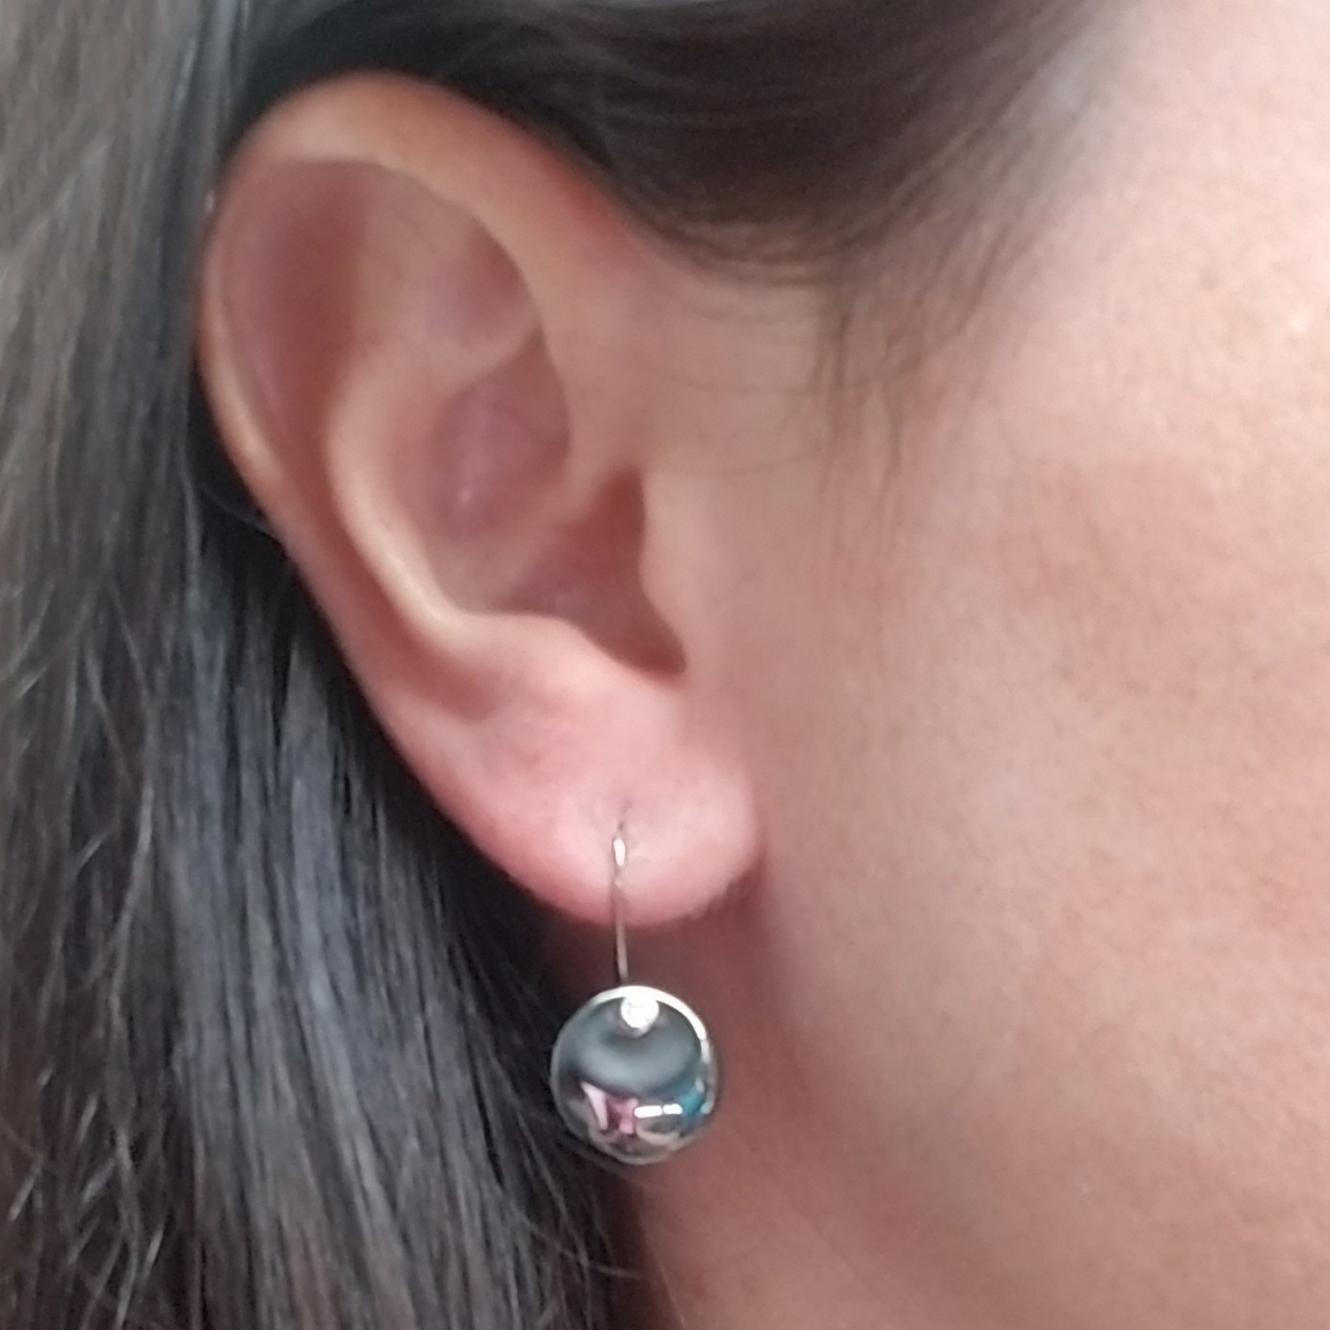 Tiffany & Co Sterling Silver Drop Earrings From The Full Moon Collection. The Earrings Feature Two Round Carved Dark Gray, Metallic Hematite Stones and 2 Round Diamonds. Shepherd's Hook Attachment. $700 MSRP.